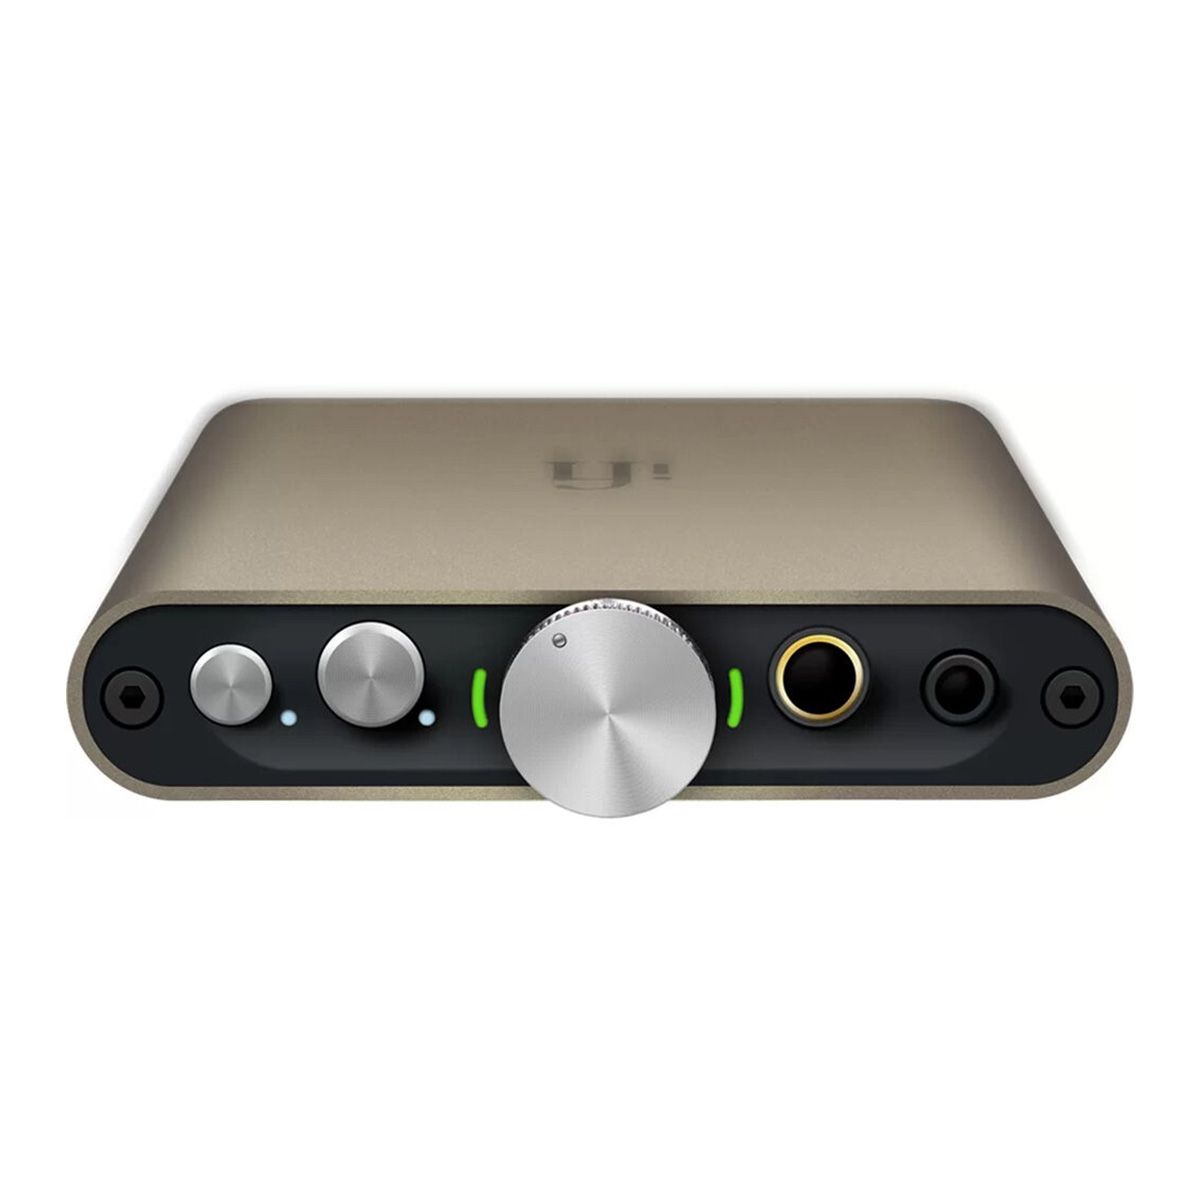 iFi Audio hip-dac 3 Portable USB DAC and Headphone Amplifier - front view